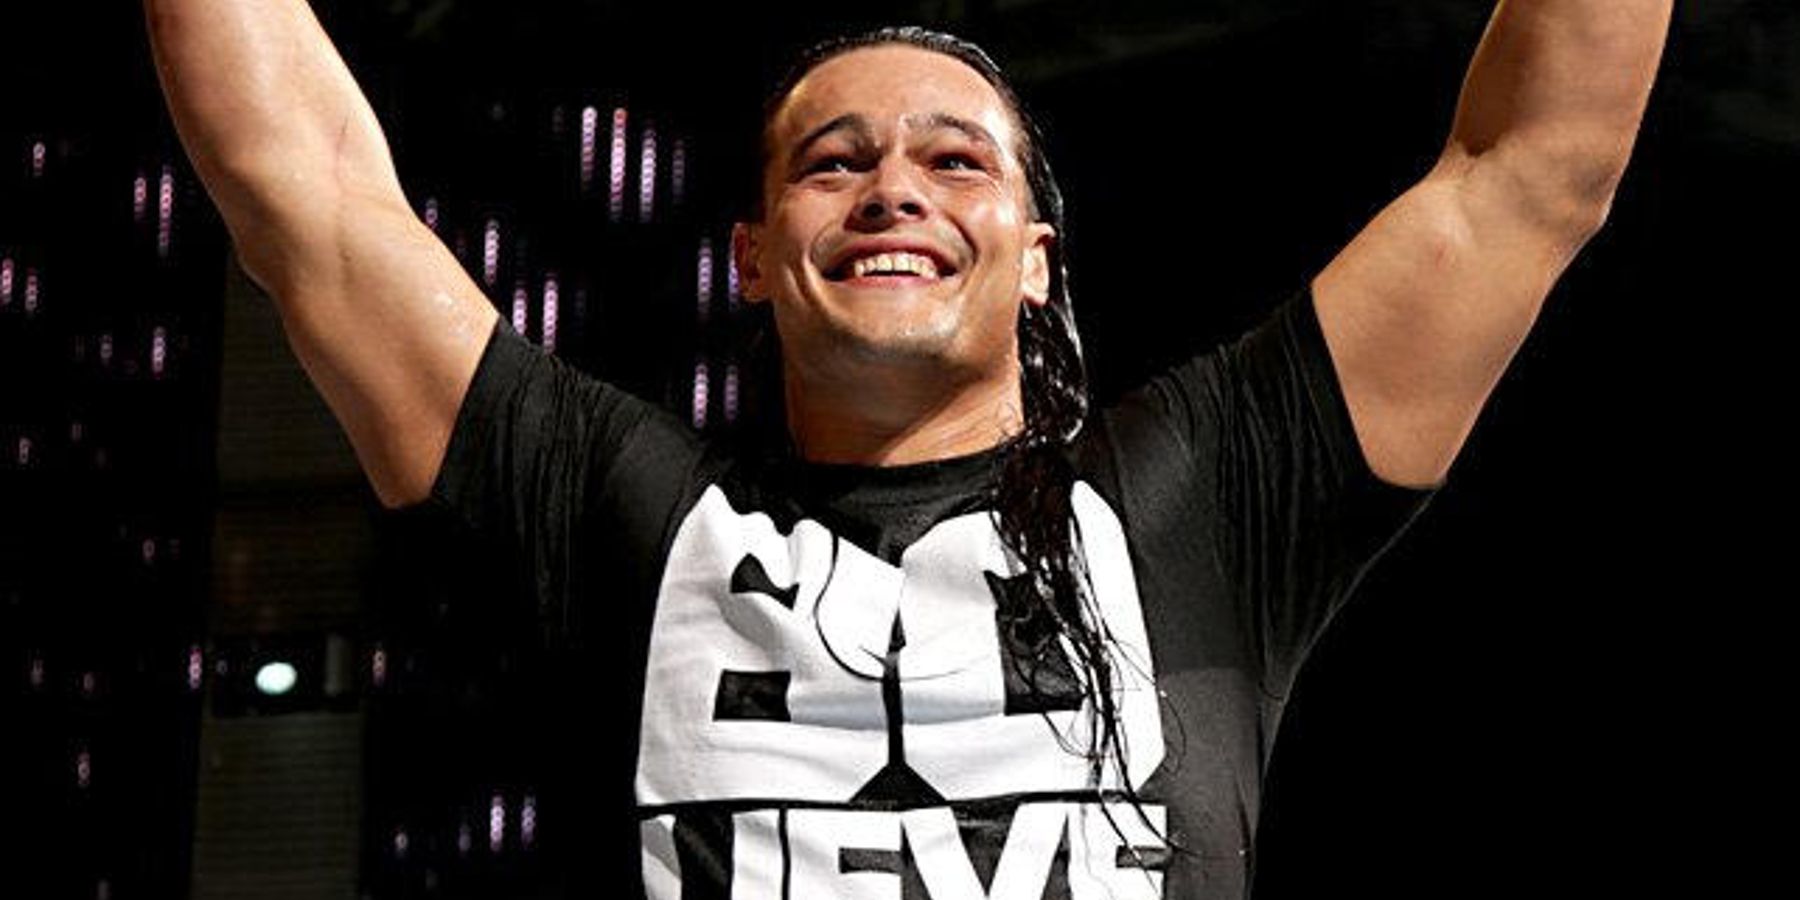 Bo Dallas encourages the WWE Universe to Bo-lieve before a match against R-Truth.